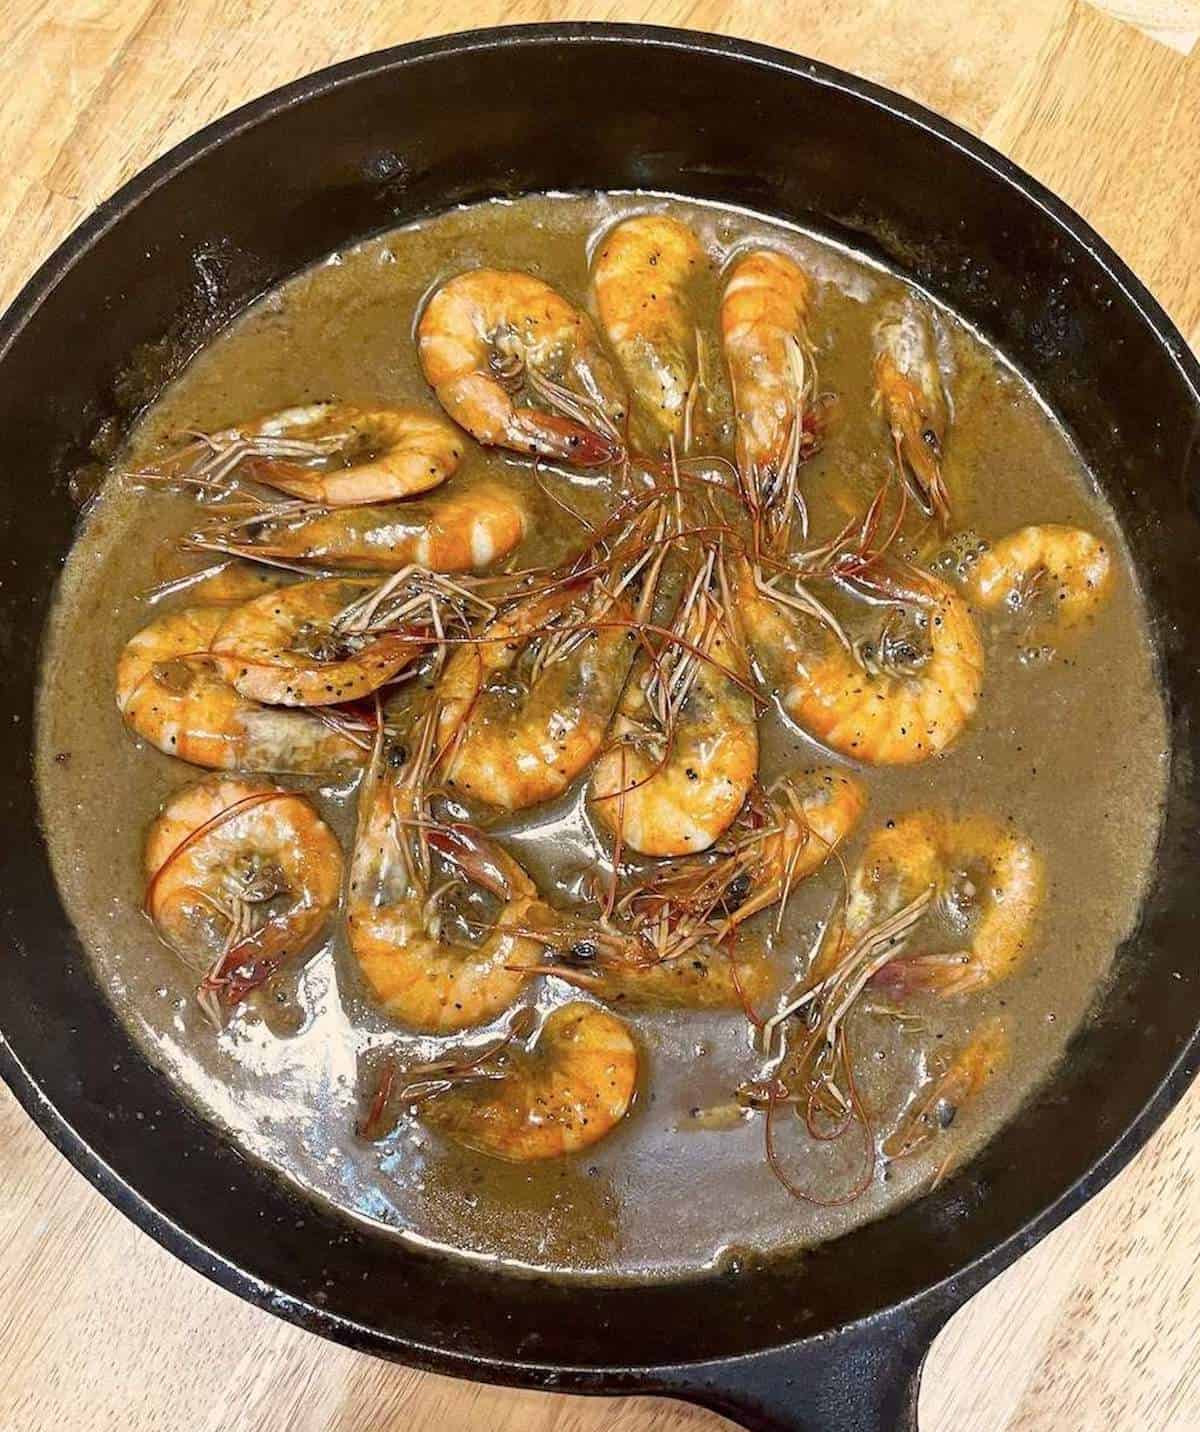 Cooked BBQ shrimp smothered in sauce in a cast iron skillet.